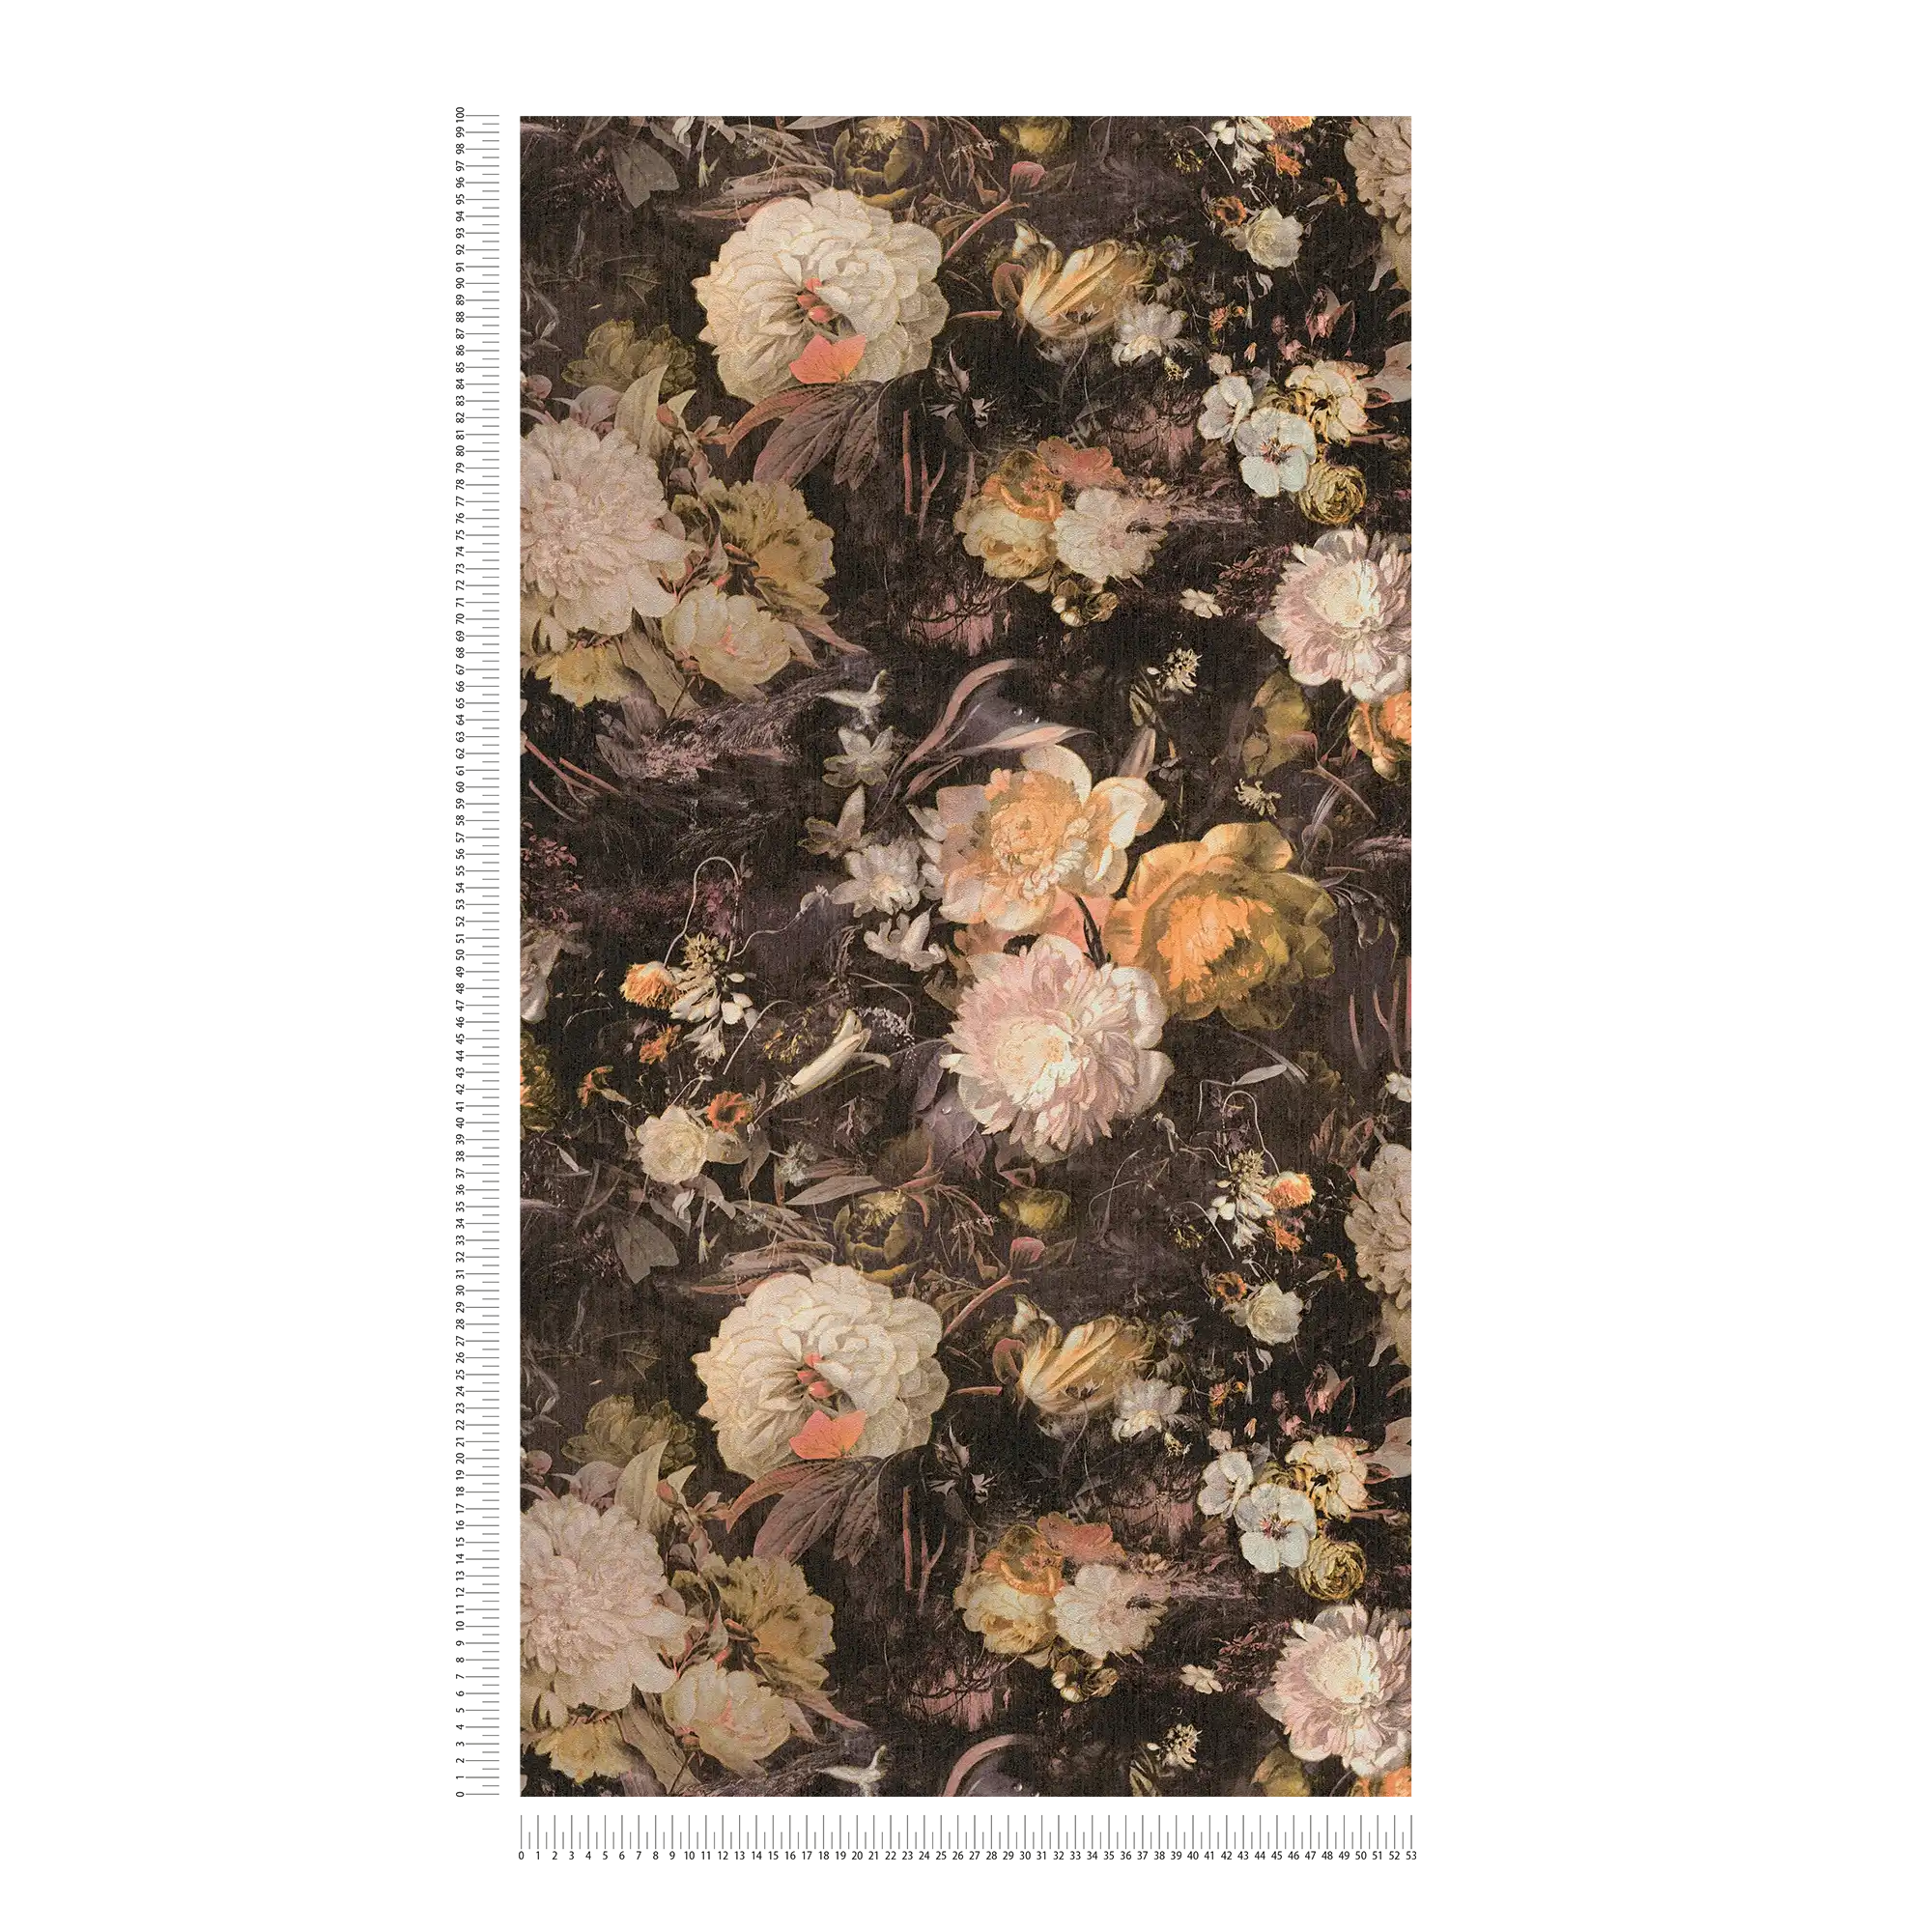             Art style floral wallpaper with roses - yellow, brown
        